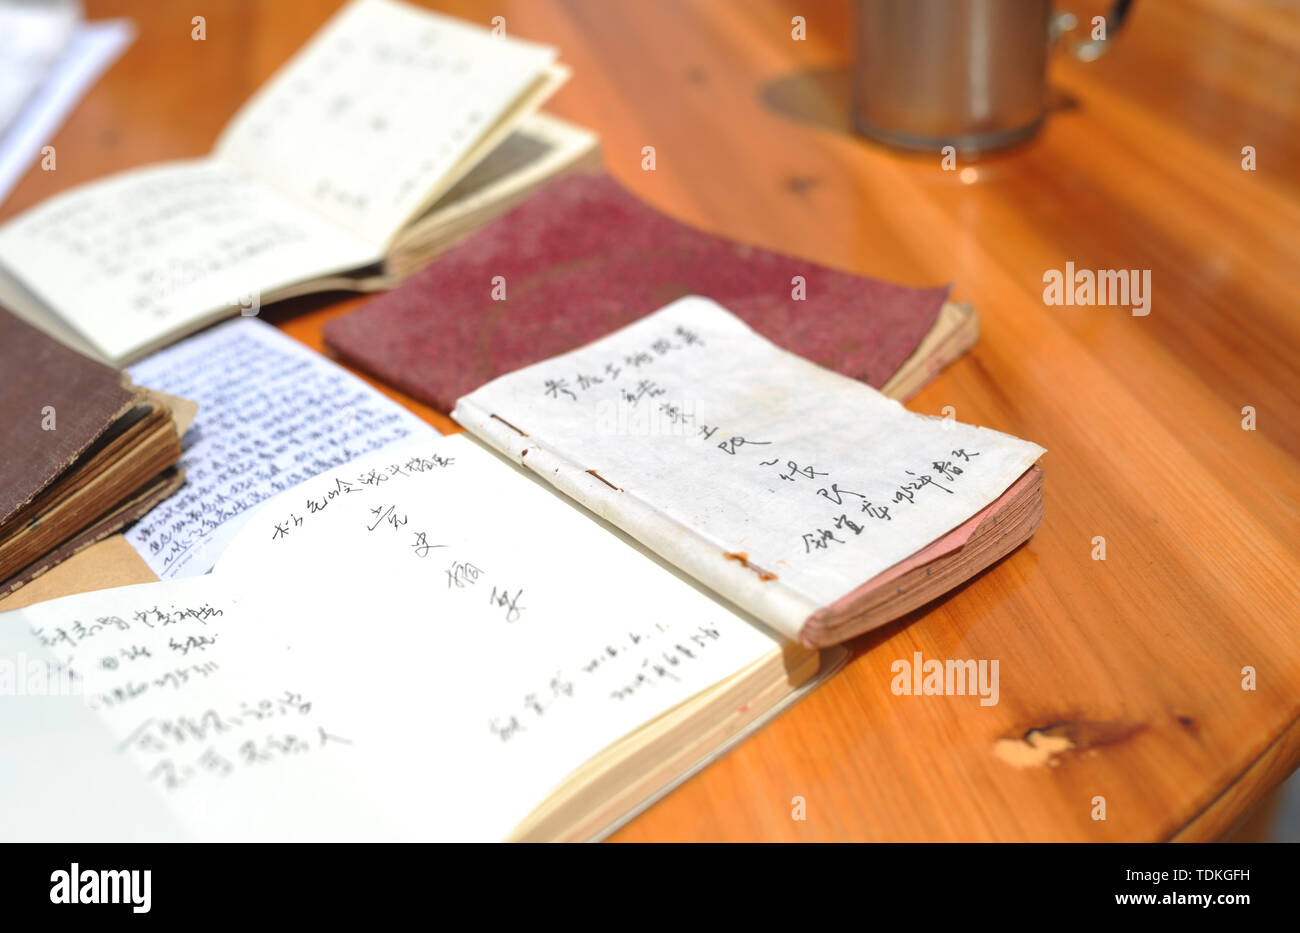 Changting. 16th June, 2019. Photo taken on June 16, 2019 shows the notebooks of Zhong Yilong, a 91-year-old retired cadre, at the Changketou Village of Nanshan Town in Changting County, southeast China's Fujian Province. Since 1953, Zhong Yilong collected the names of martyrs who participated in revolution from 1928 to 1934. He also set up an exhibition regarding the Red Army at his ancestral house several years ago to pass the history down. Credit: Li Renzi/Xinhua/Alamy Live News Stock Photo